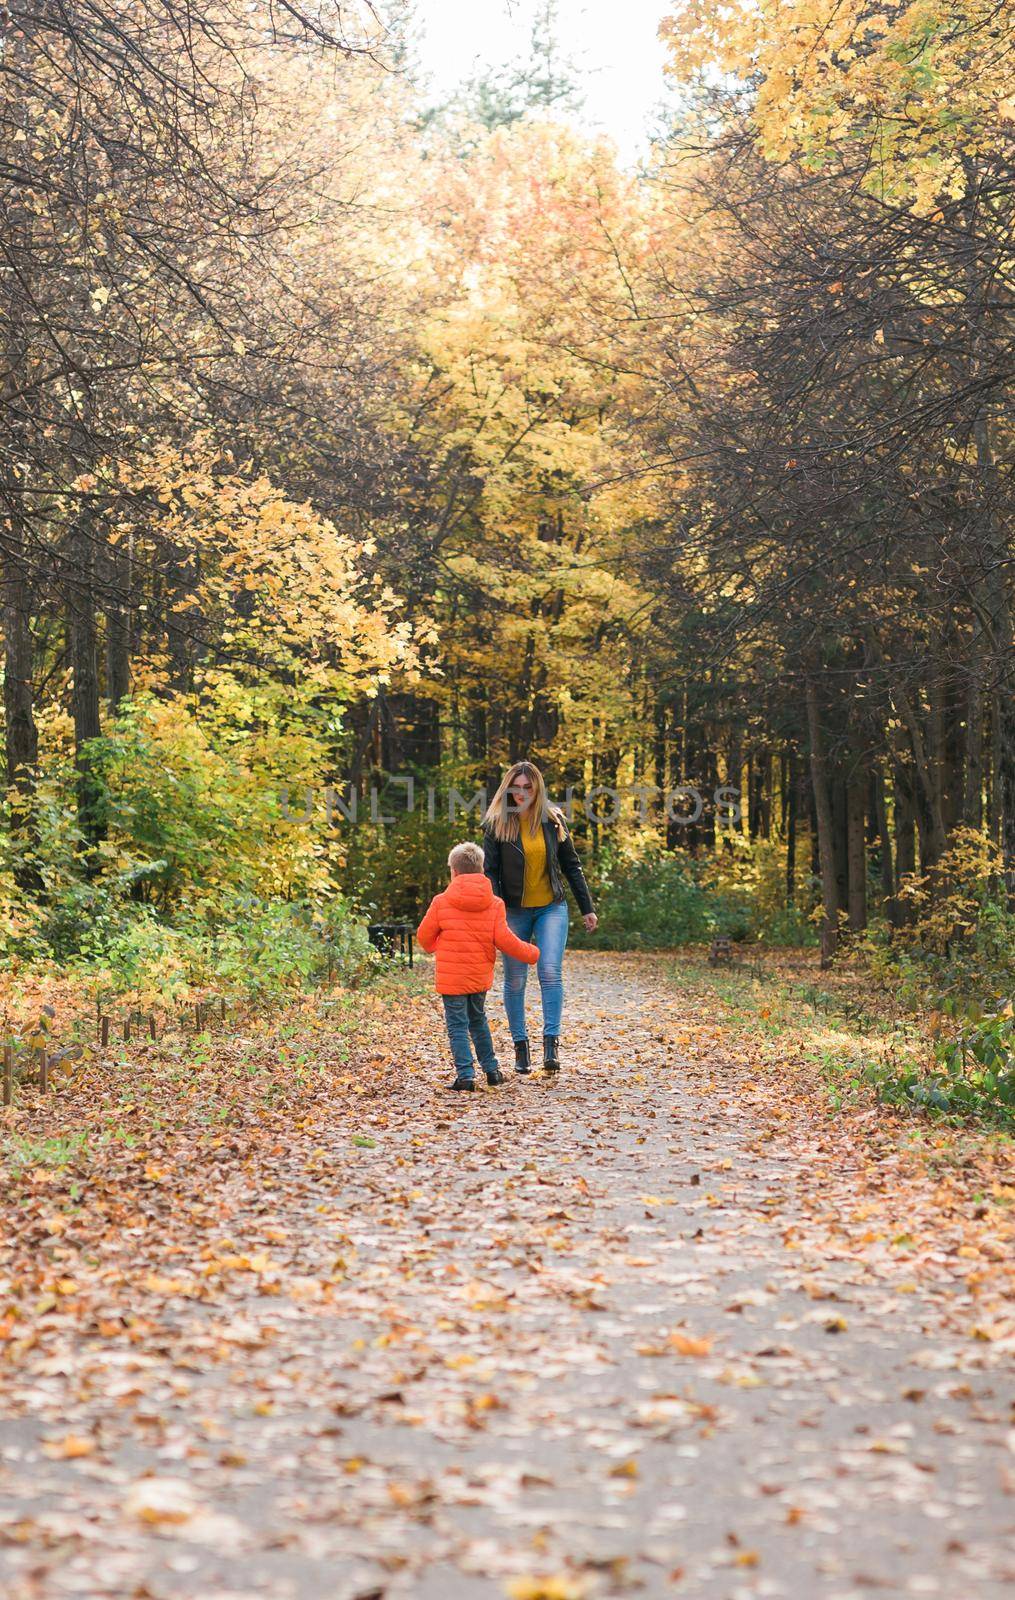 Mother and son walking in the fall park and enjoying the beautiful autumn nature. Season, single parent and children concept. by Satura86